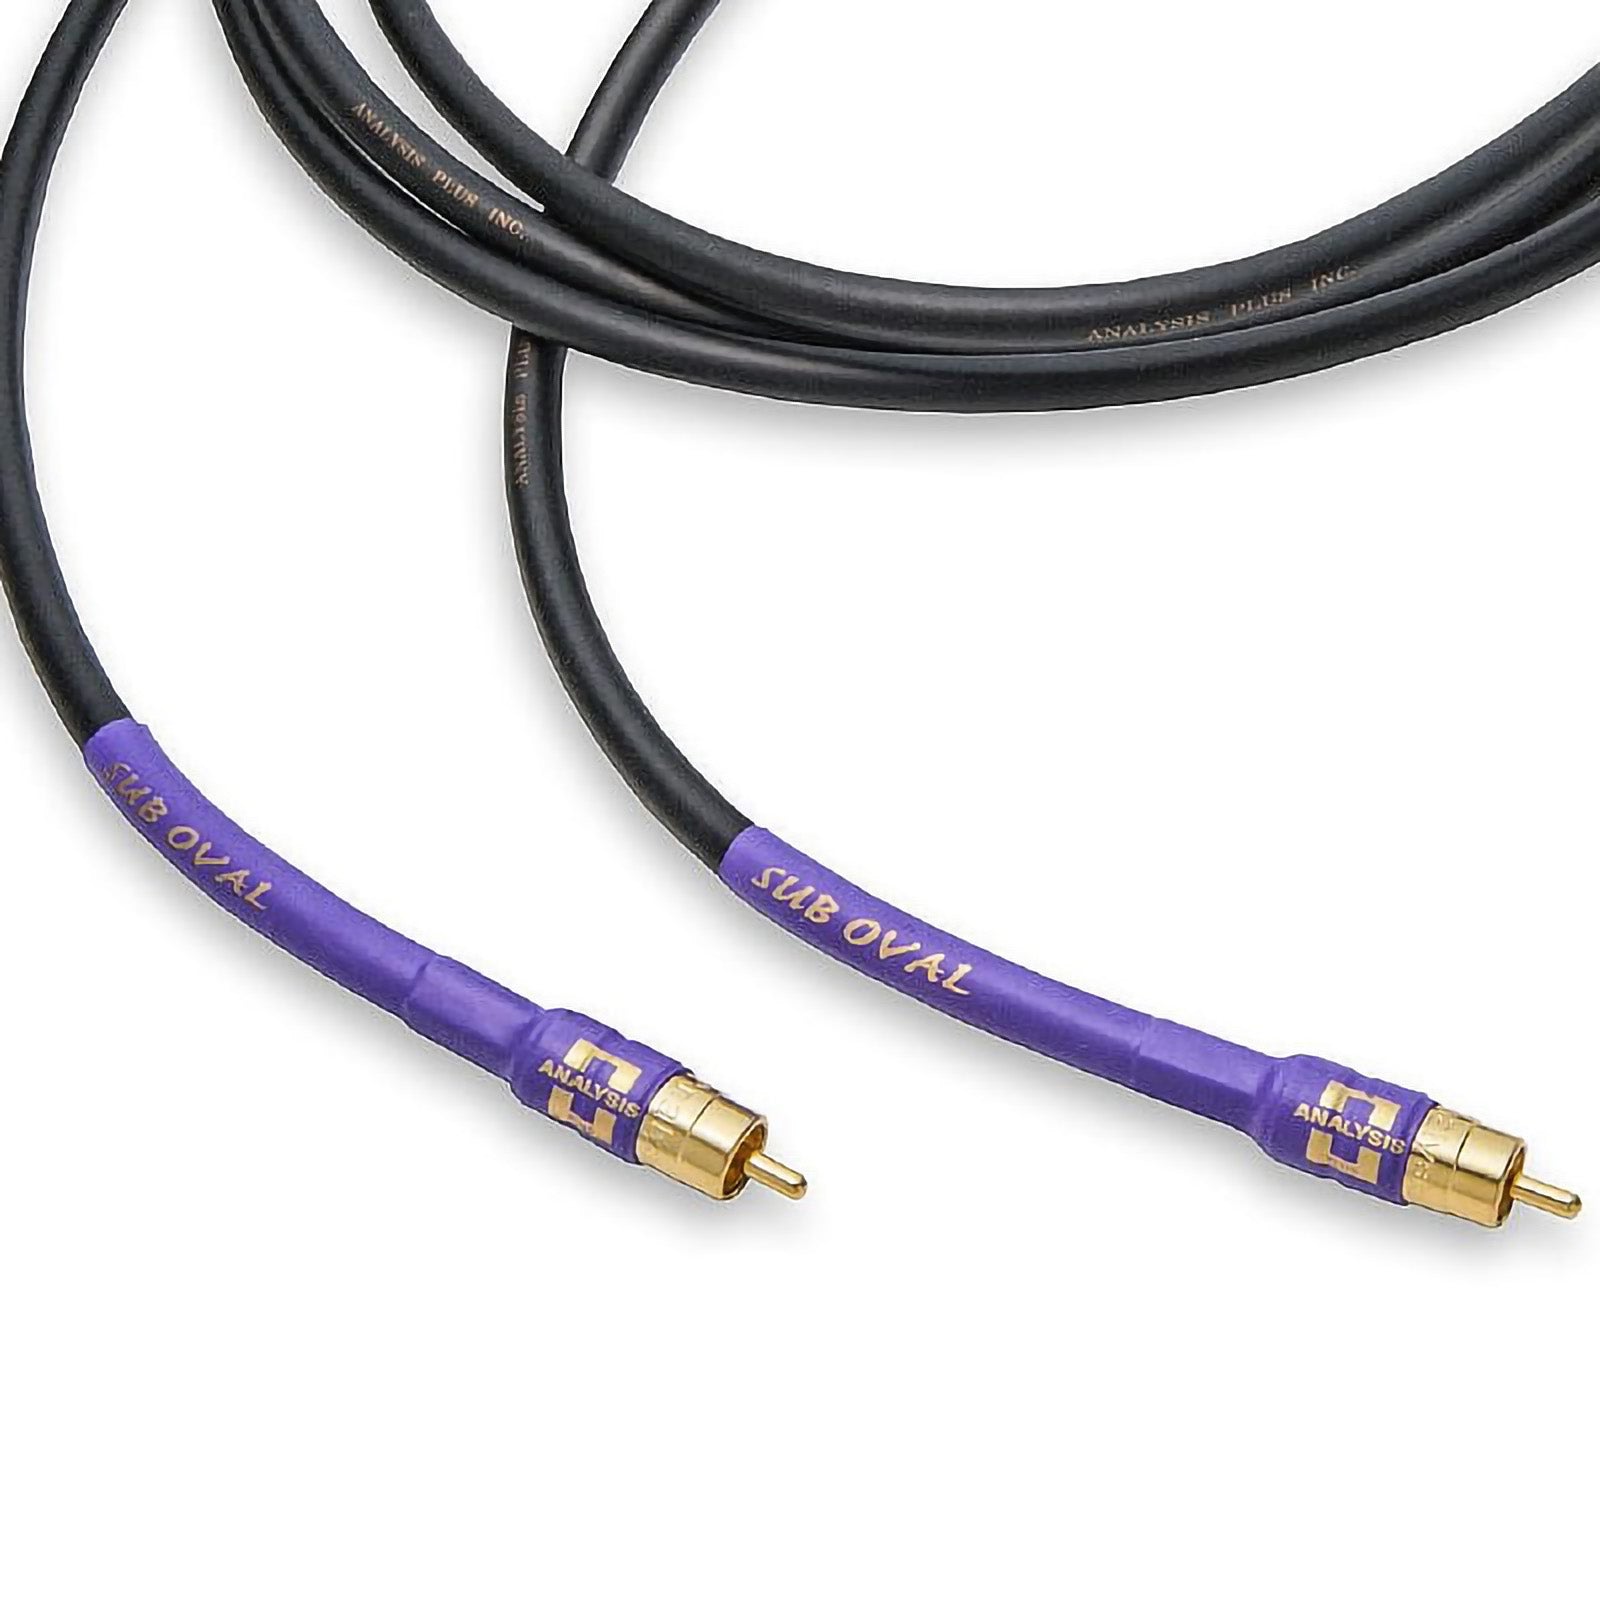 Analysis Plus Sub Oval Interconnect Cable